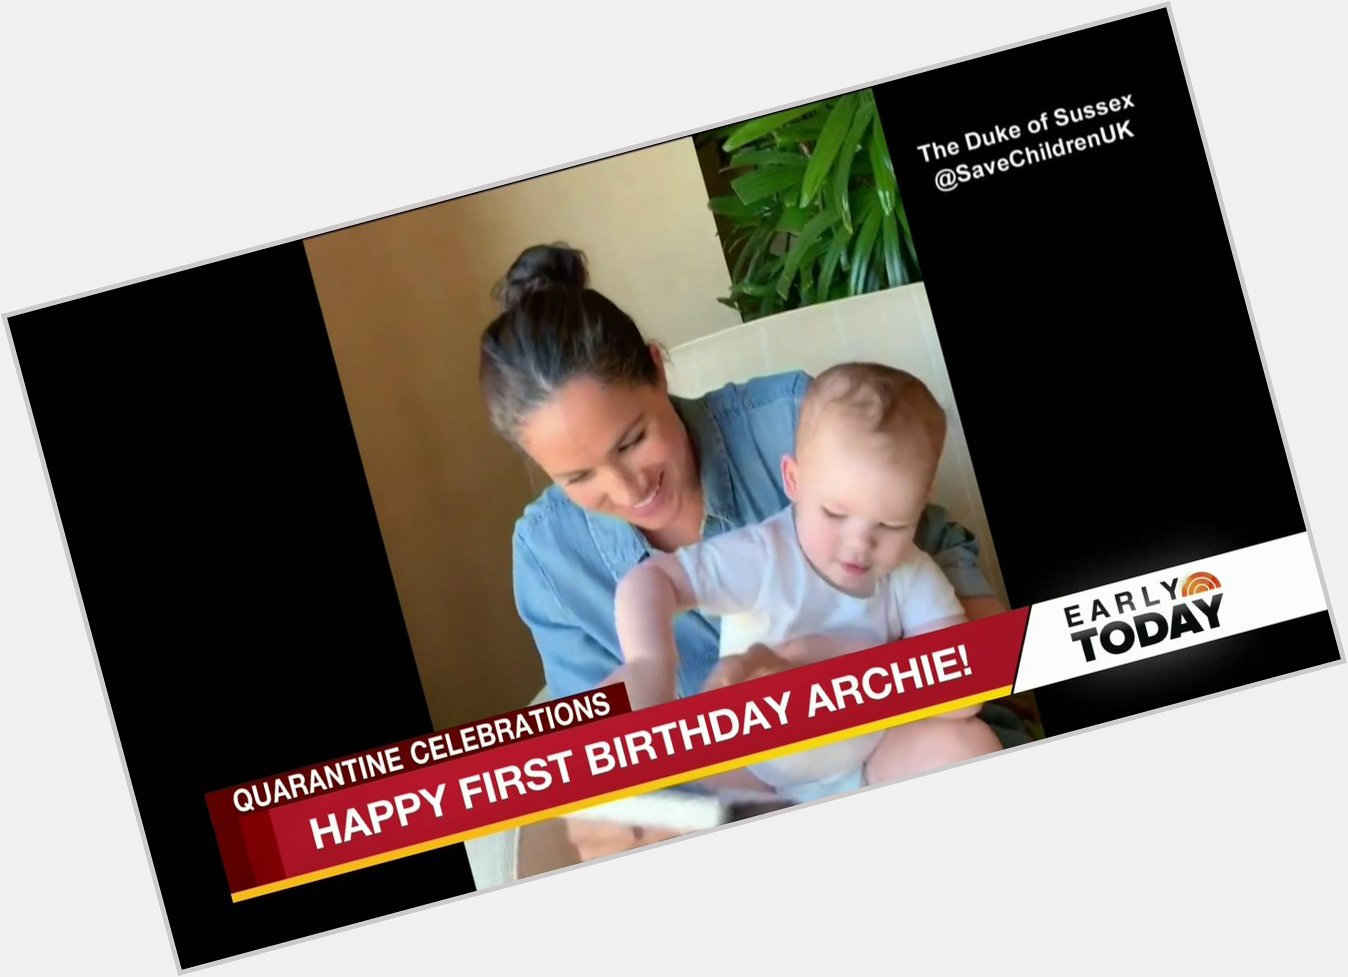 Happy Birthday baby Archie! The young prince turned 1 year old on Wednesday. 